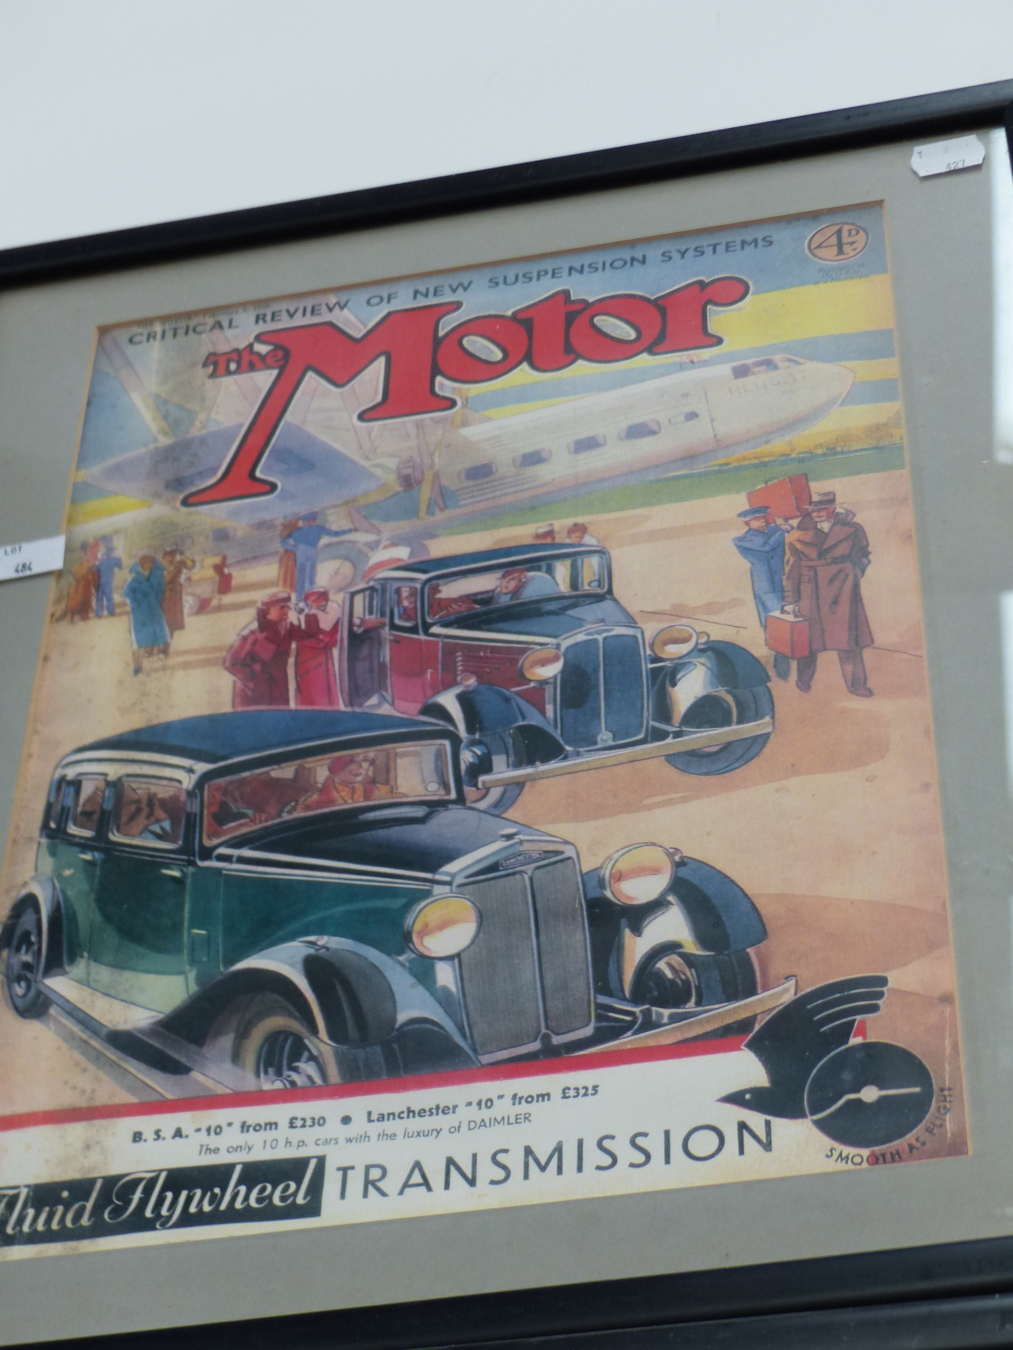 A GROUP OF VINTAGE AND LATER COLOUR PRINTS OF TRAVEL POSTERS,VINTAGE AUTOMOBILES ETC (7) - Image 13 of 13